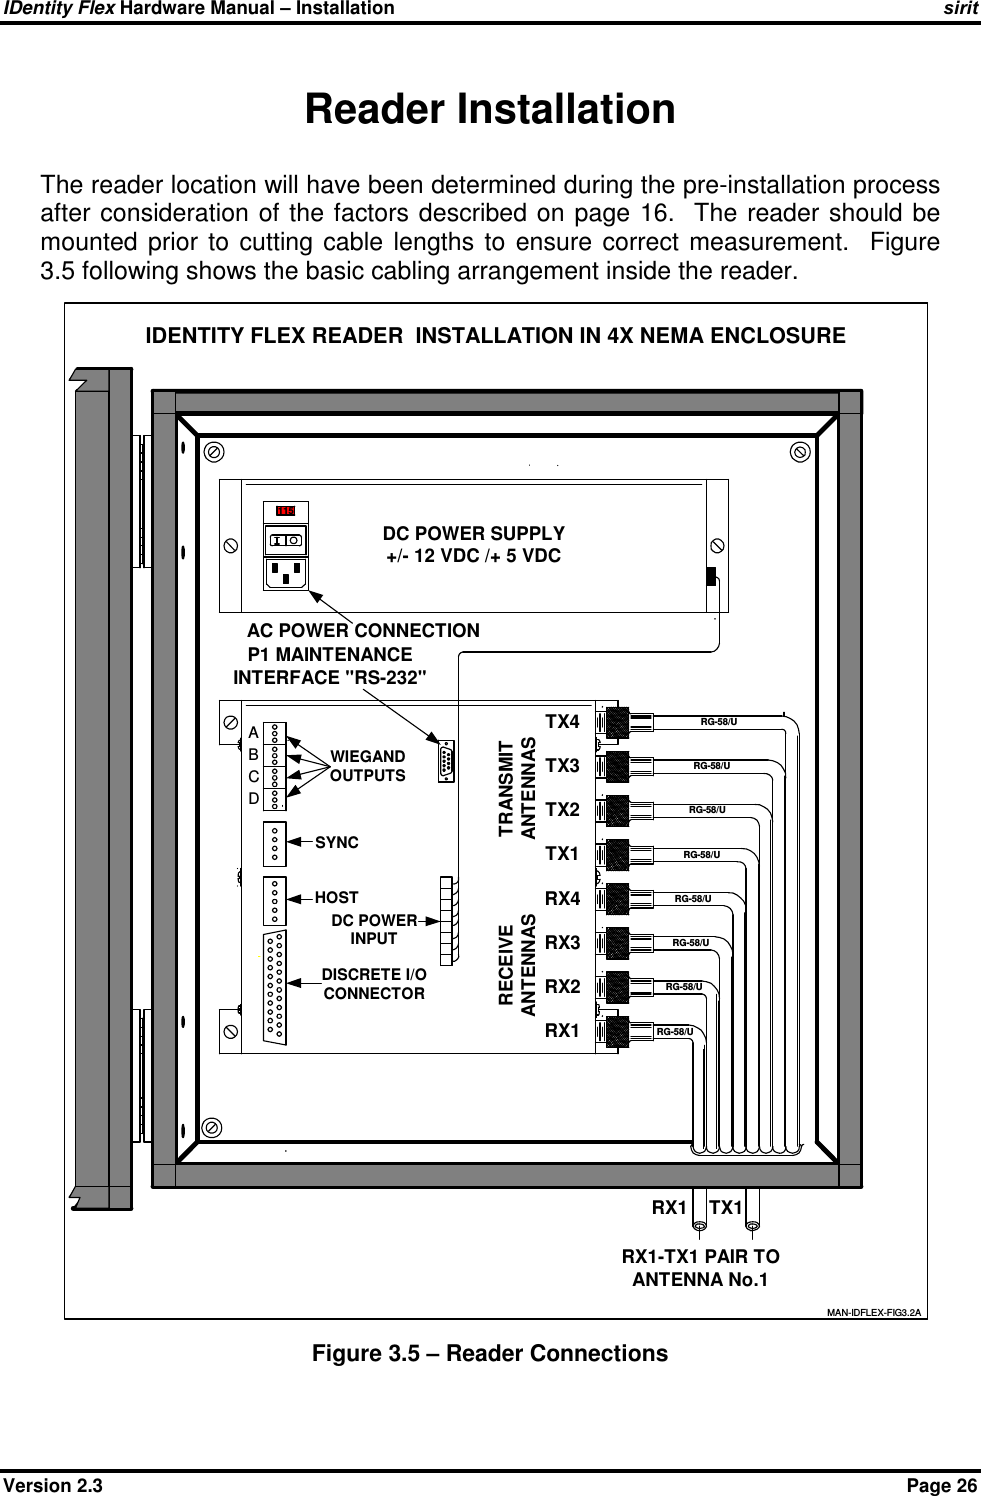 IDentity Flex Hardware Manual – Installation    sirit Version 2.3    Page 26 Reader Installation The reader location will have been determined during the pre-installation process after  consideration of the  factors described on  page  16.  The reader  should be mounted  prior  to  cutting  cable  lengths  to  ensure  correct  measurement.    Figure 3.5 following shows the basic cabling arrangement inside the reader. Figure 3.5 – Reader Connections RX1TX1115RG-58/URX2RX3RX4TX2TX3TX4WIEGANDOUTPUTSDC POWERINPUTRG-58/URG-58/URG-58/URG-58/URG-58/URG-58/URG-58/UDC POWER SUPPLY+/- 12 VDC /+ 5 VDCRX1 TX1RX1-TX1 PAIR TOANTENNA No.1P1 MAINTENANCEINTERFACE &quot;RS-232&quot;IDENTITY FLEX READER  INSTALLATION IN 4X NEMA ENCLOSURERECEIVEANTENNASTRANSMITANTENNASAC POWER CONNECTIONSYNCHOSTDISCRETE I/OCONNECTORABCDMAN-IDFLEX-FIG3.2A